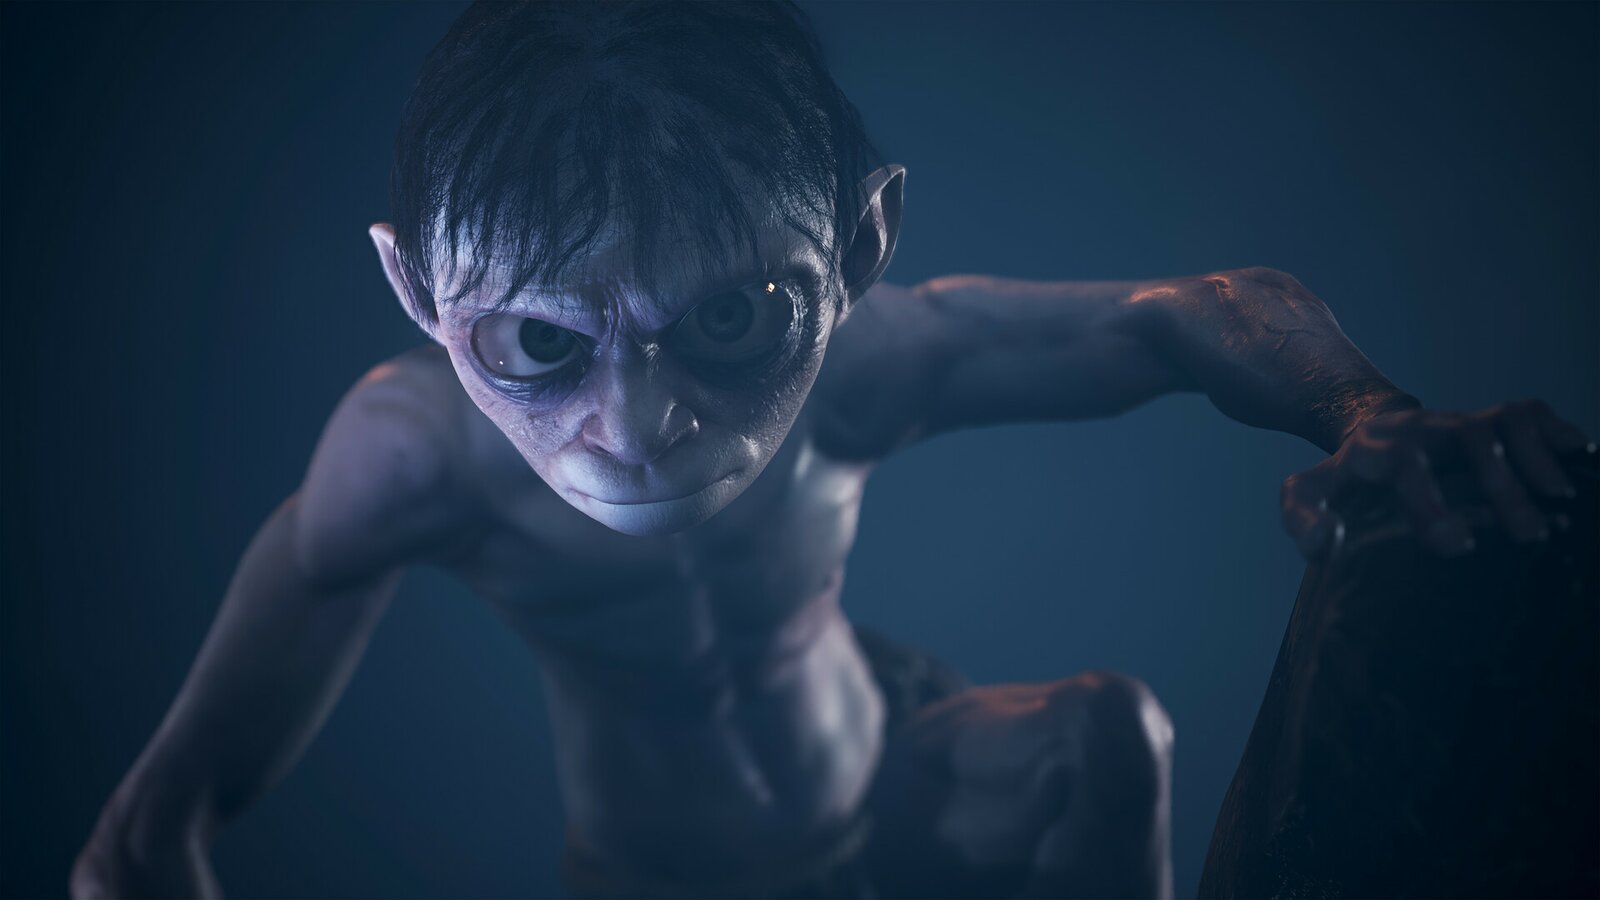 The Lord of the Rings: Gollum - Emotes Pack